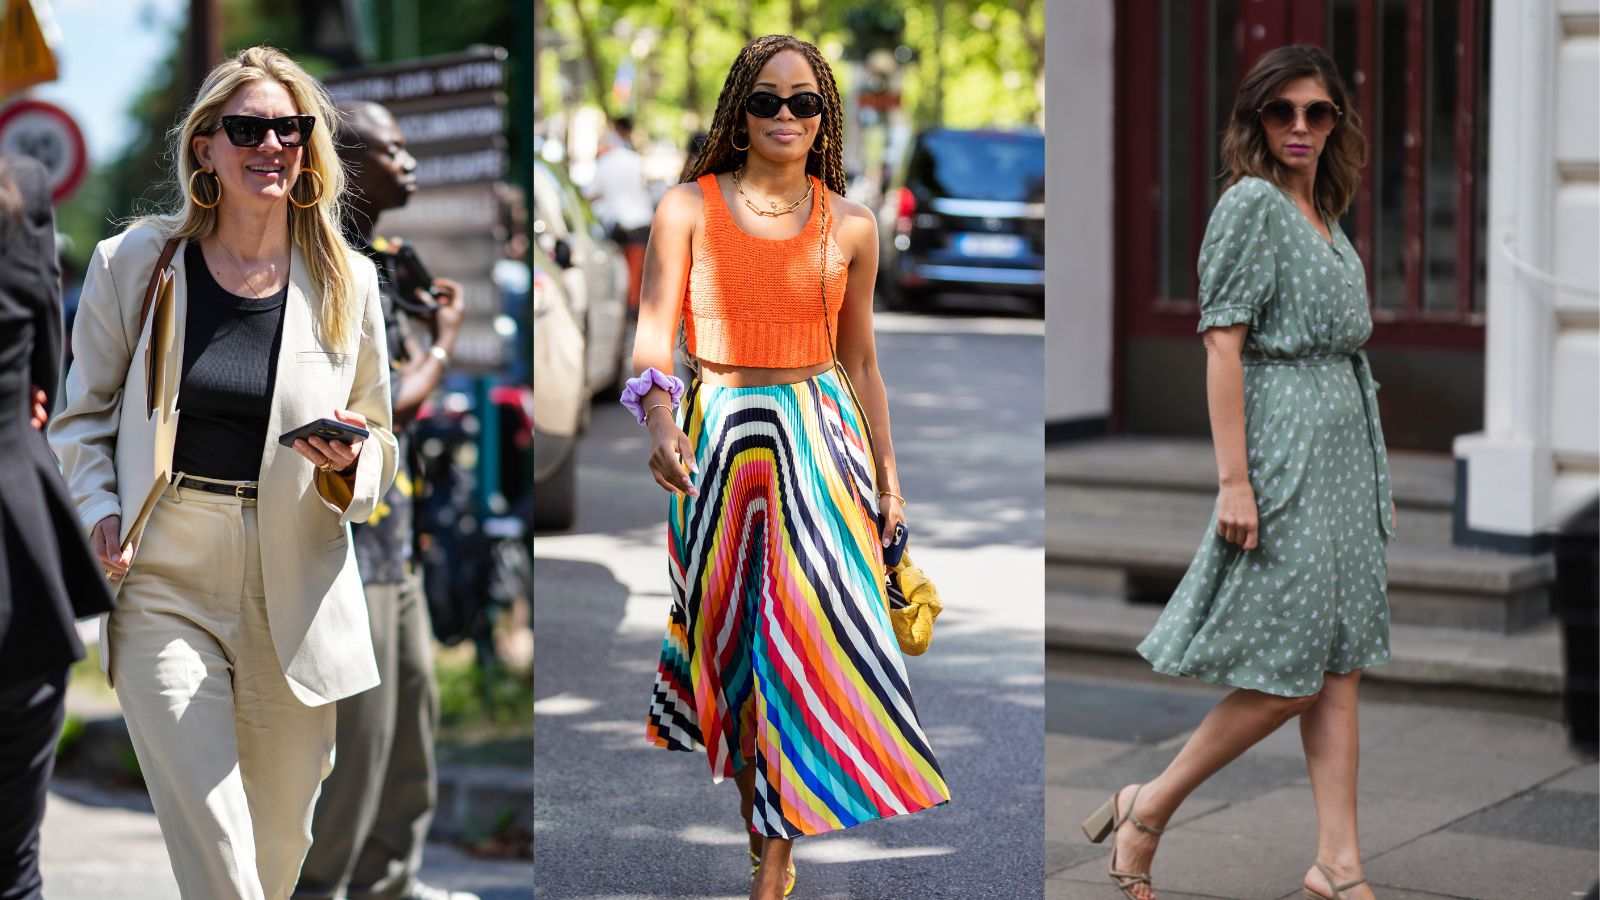 Brunch outfit ideas: Sharpen up your weekend style